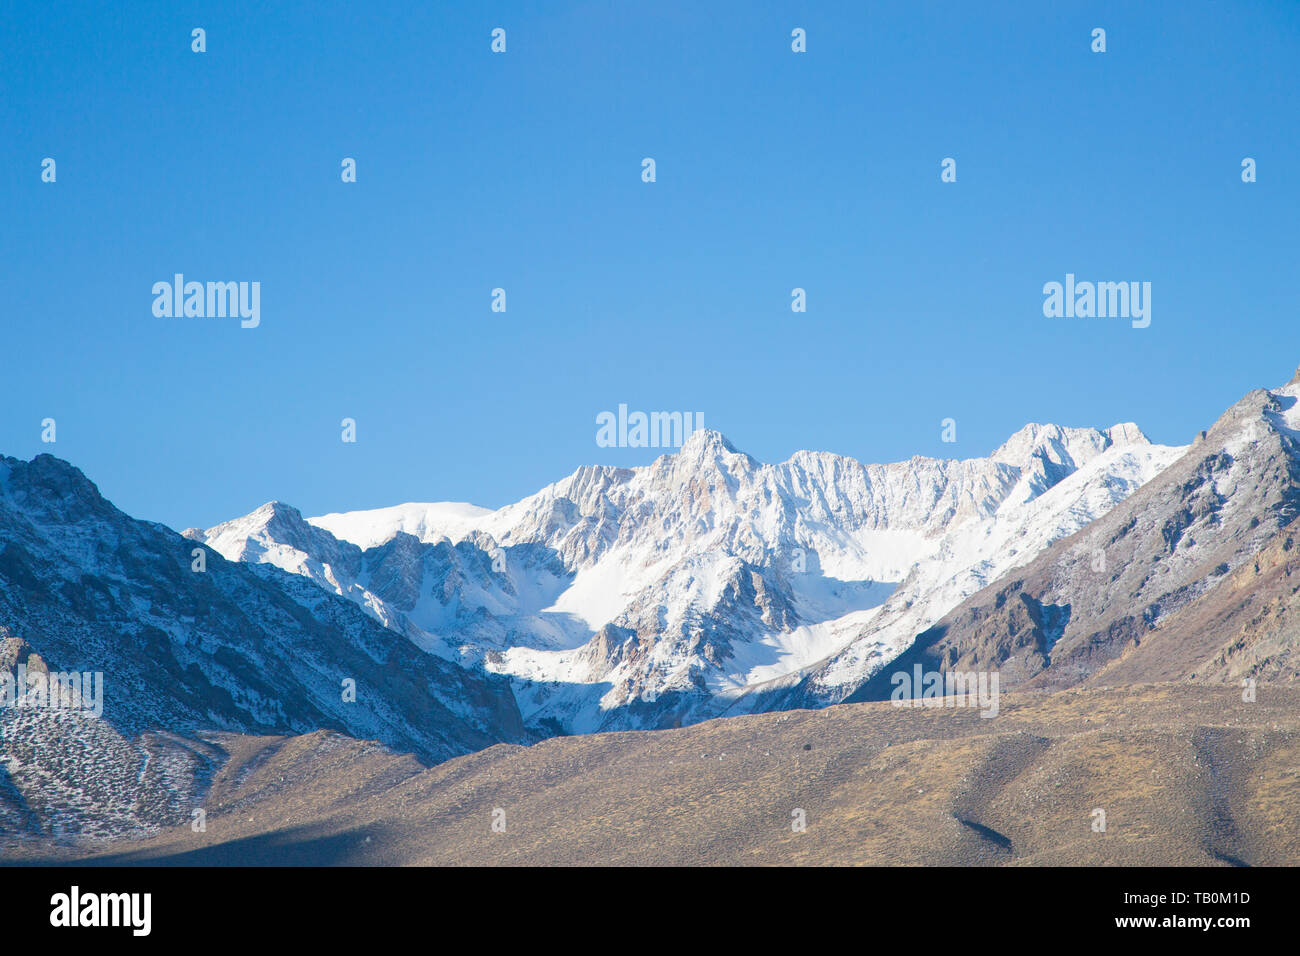 Snowcapped Sierra Nevada mountains in California, blue sky in background.  Hard shadows from morning light. Stock Photo